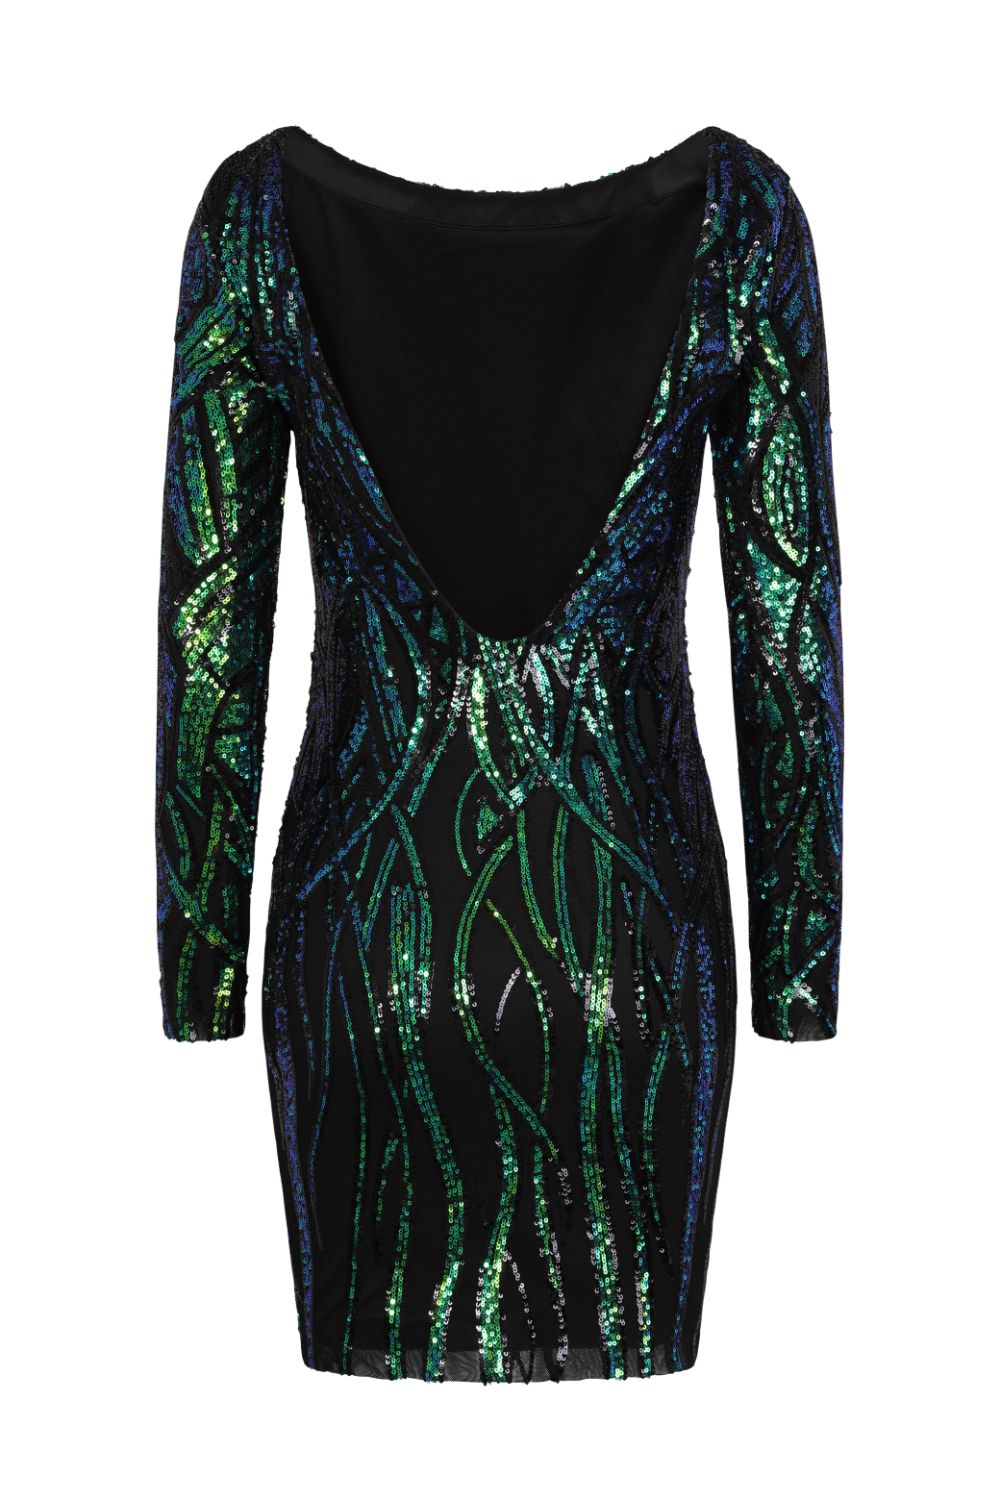 Fortune Black Green Luxe Illusion Sequin Long Sleeve Open Back Midi Dress